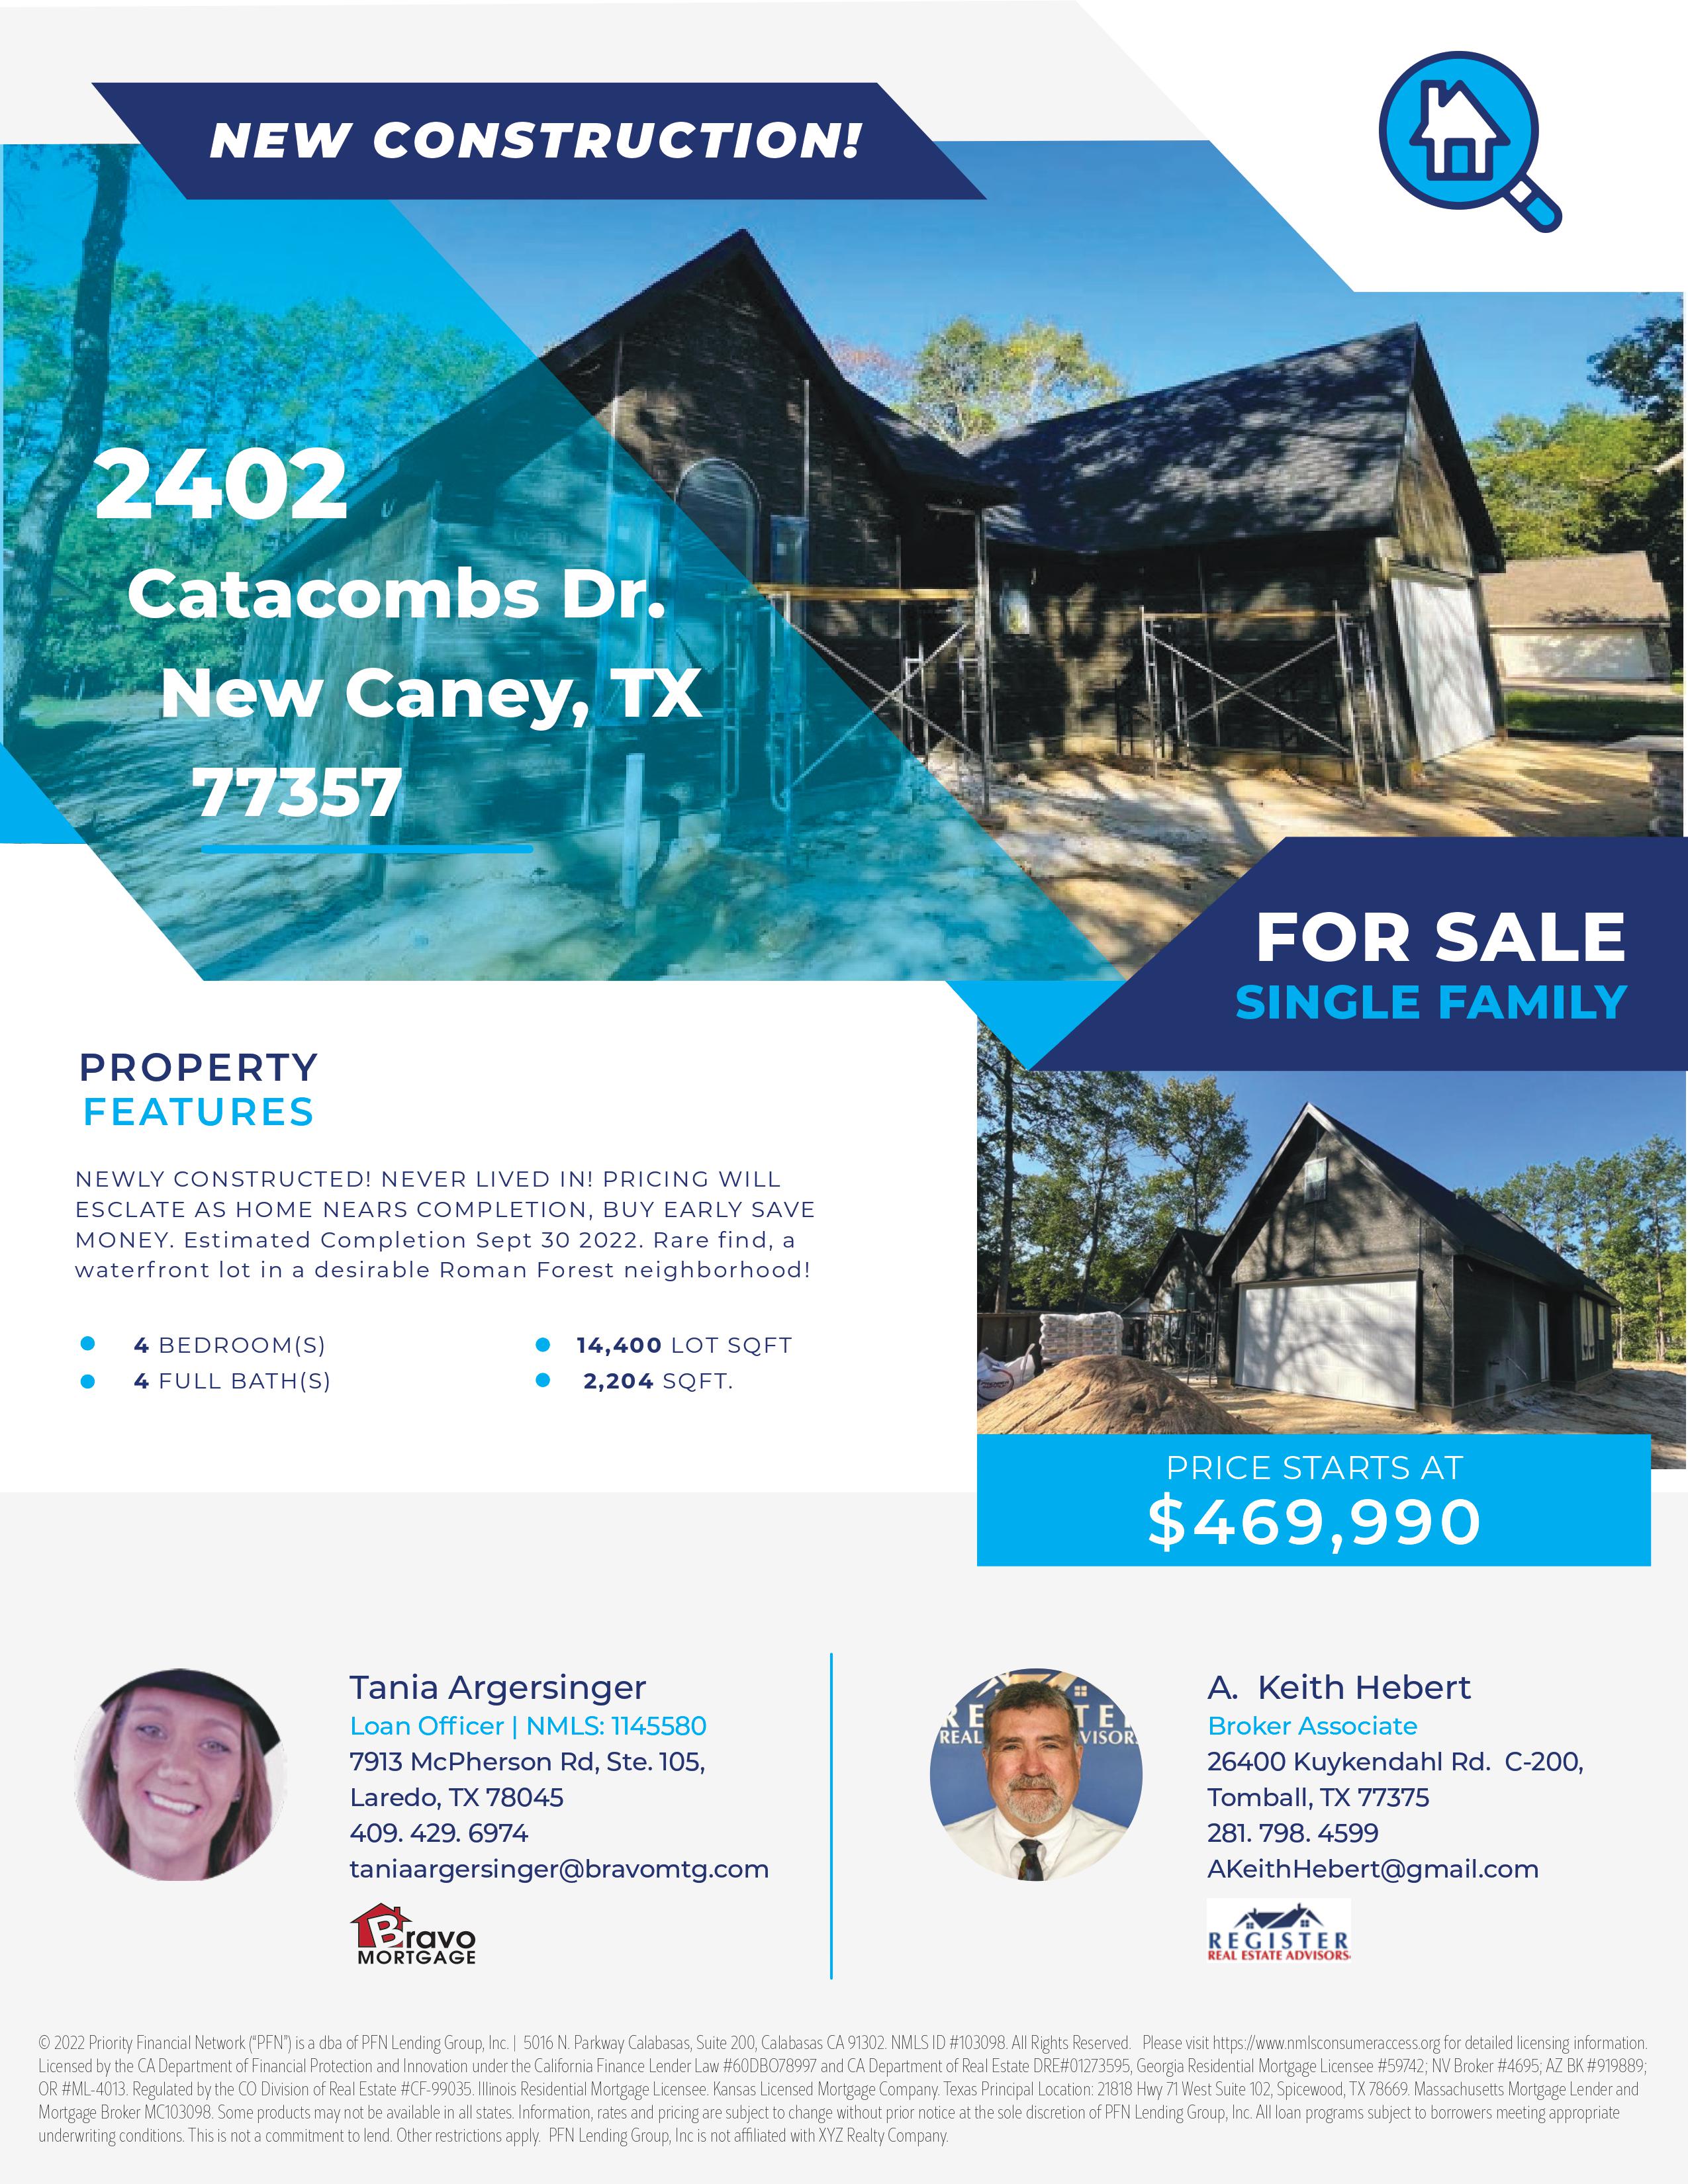 For Sale | 2402 Catacombs Drive, New Caney, Texas 77357 Montgomery County